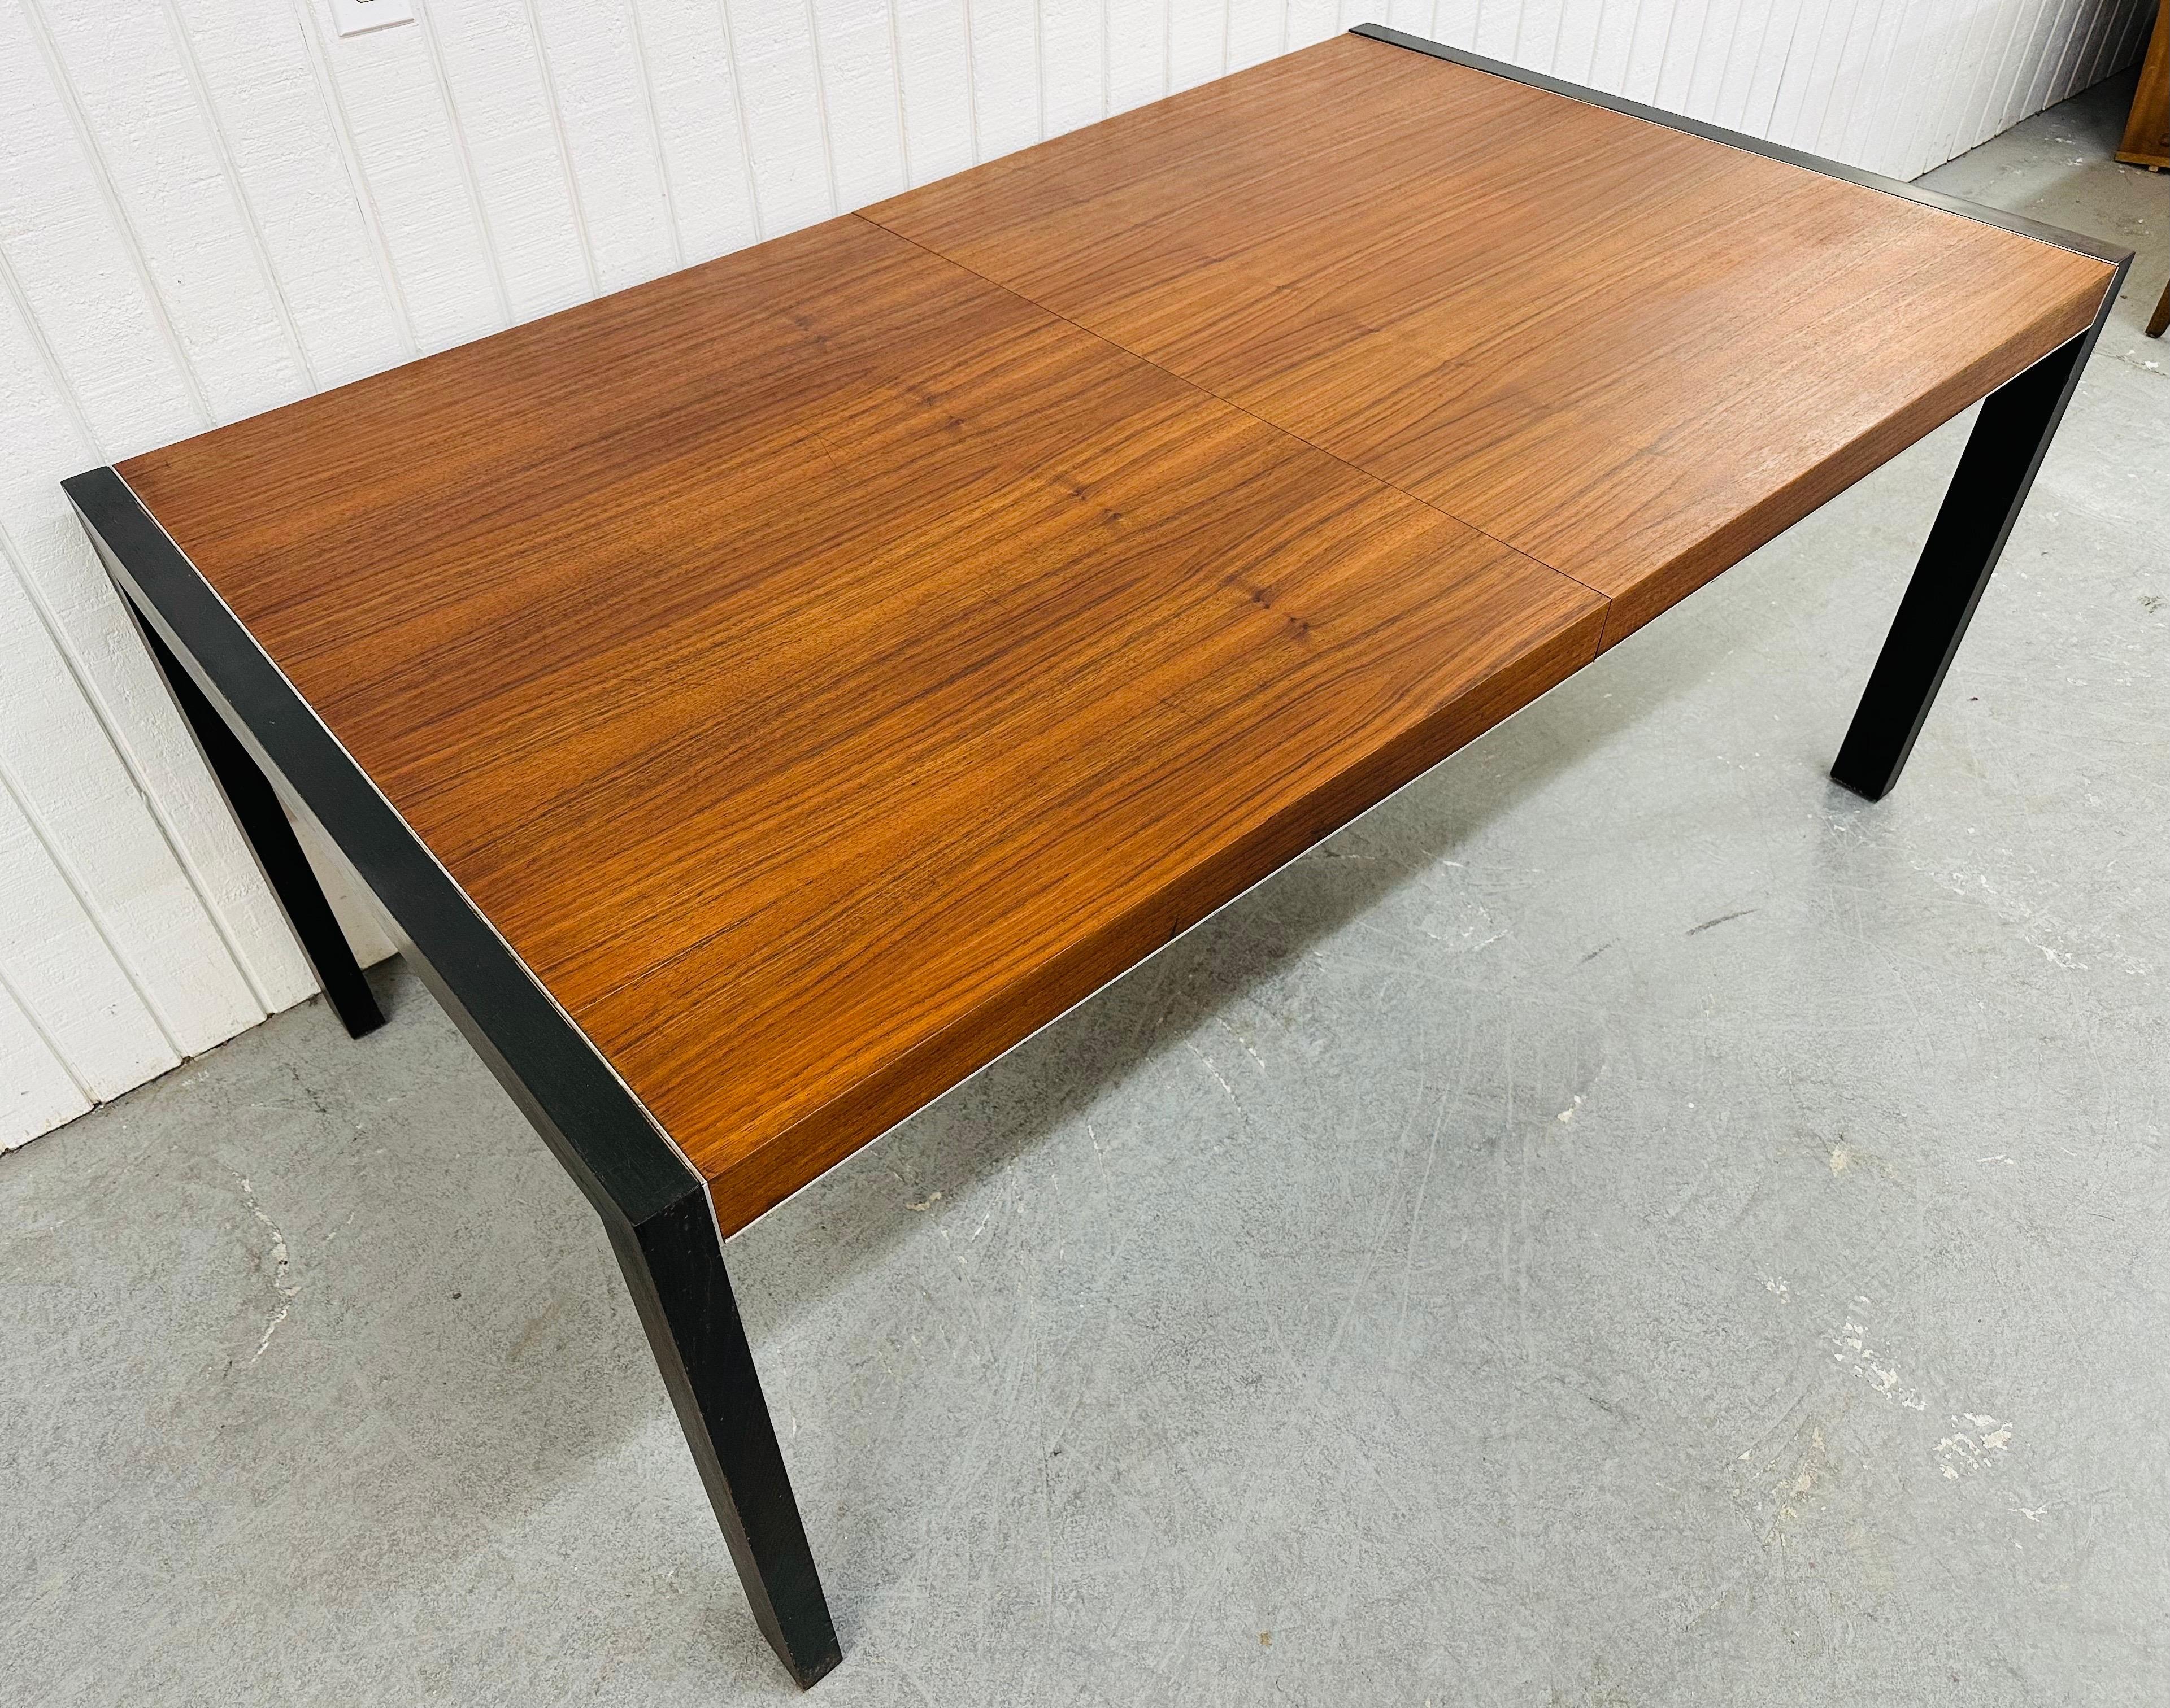 This listing is for a Mid-Century Modern John Stuart Walnut Dining Table. Featuring a straight line design, removable black legs, chrome accent, and a beautiful rectangular walnut top. This is an exceptional combination of quality and design by John